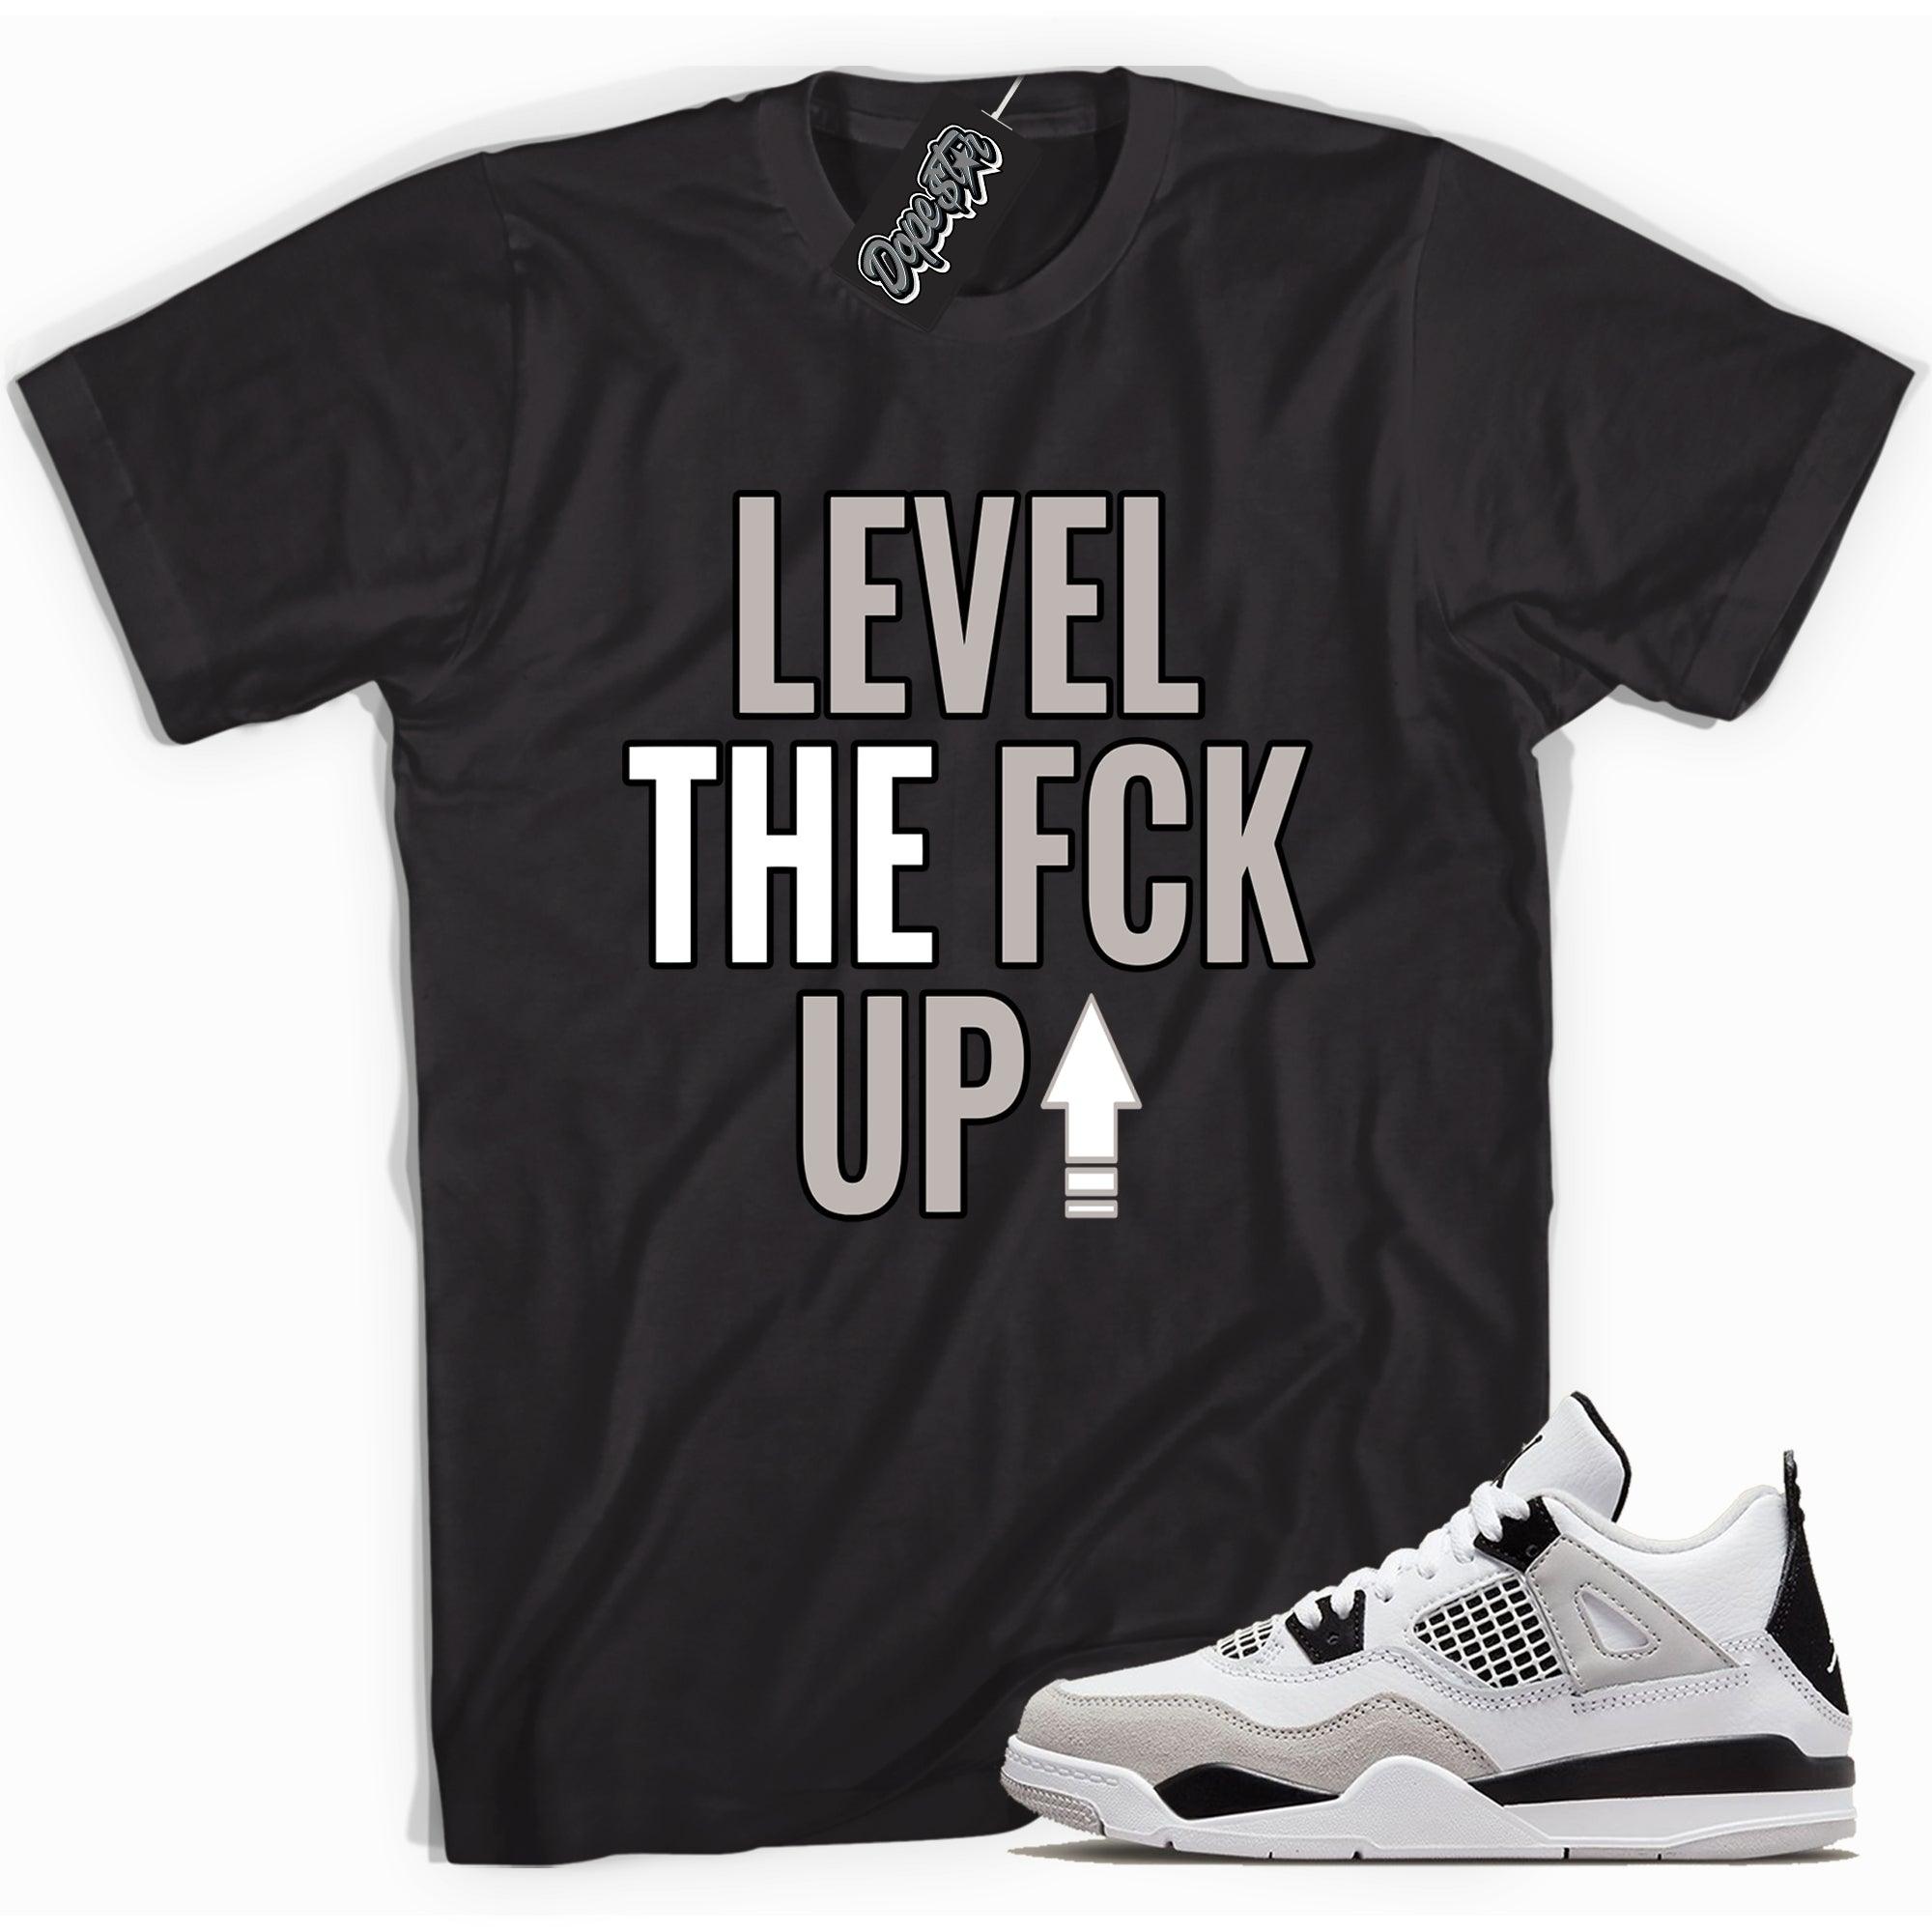 Cool black graphic tee with 'Level Up' print, that perfectly matches Air Jordan 4 Retro Military Black sneakers.